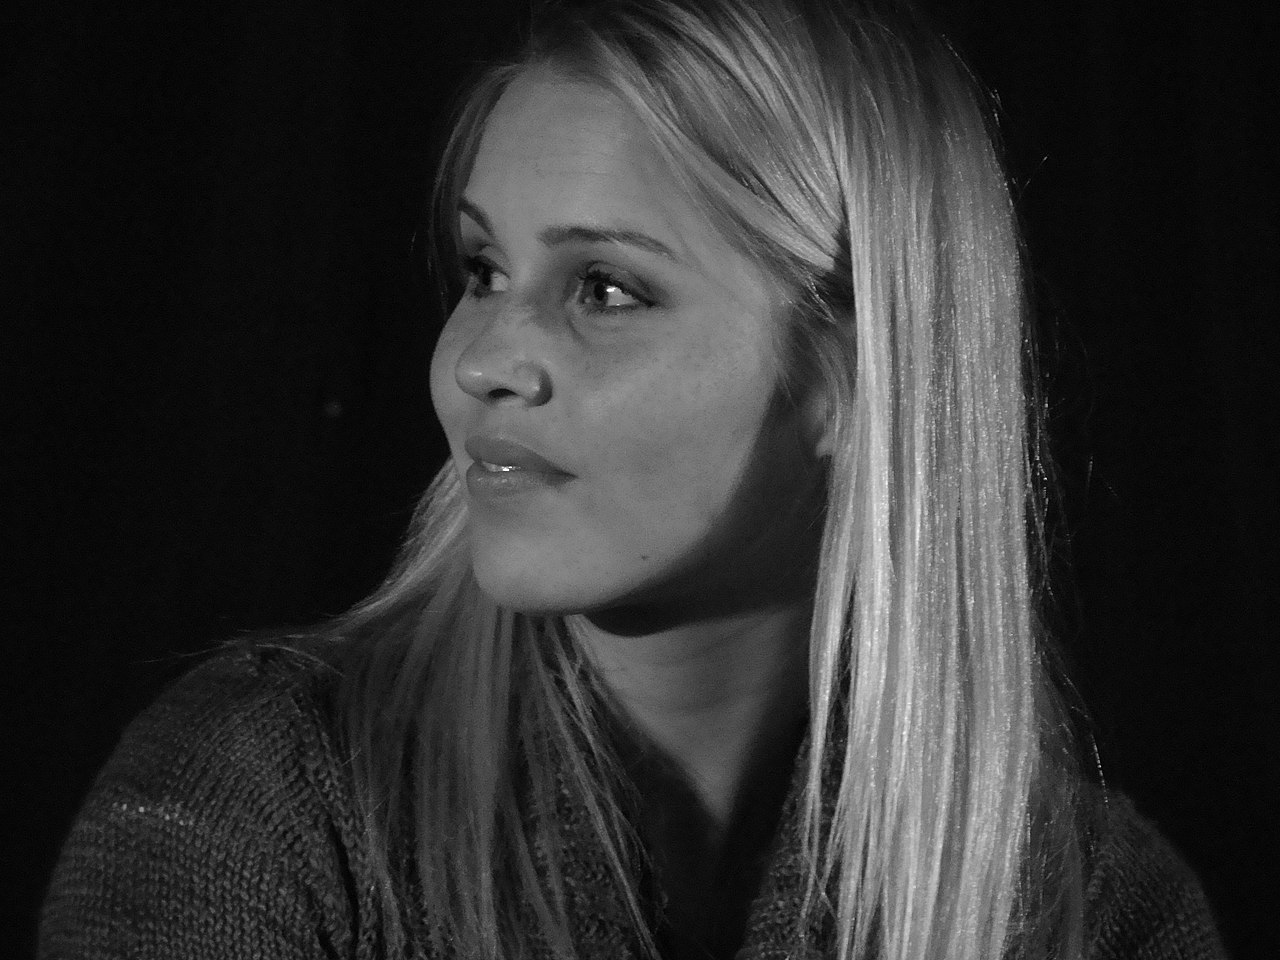 File:Claire Holt 2012 (2).jpg - Wikimedia Commons